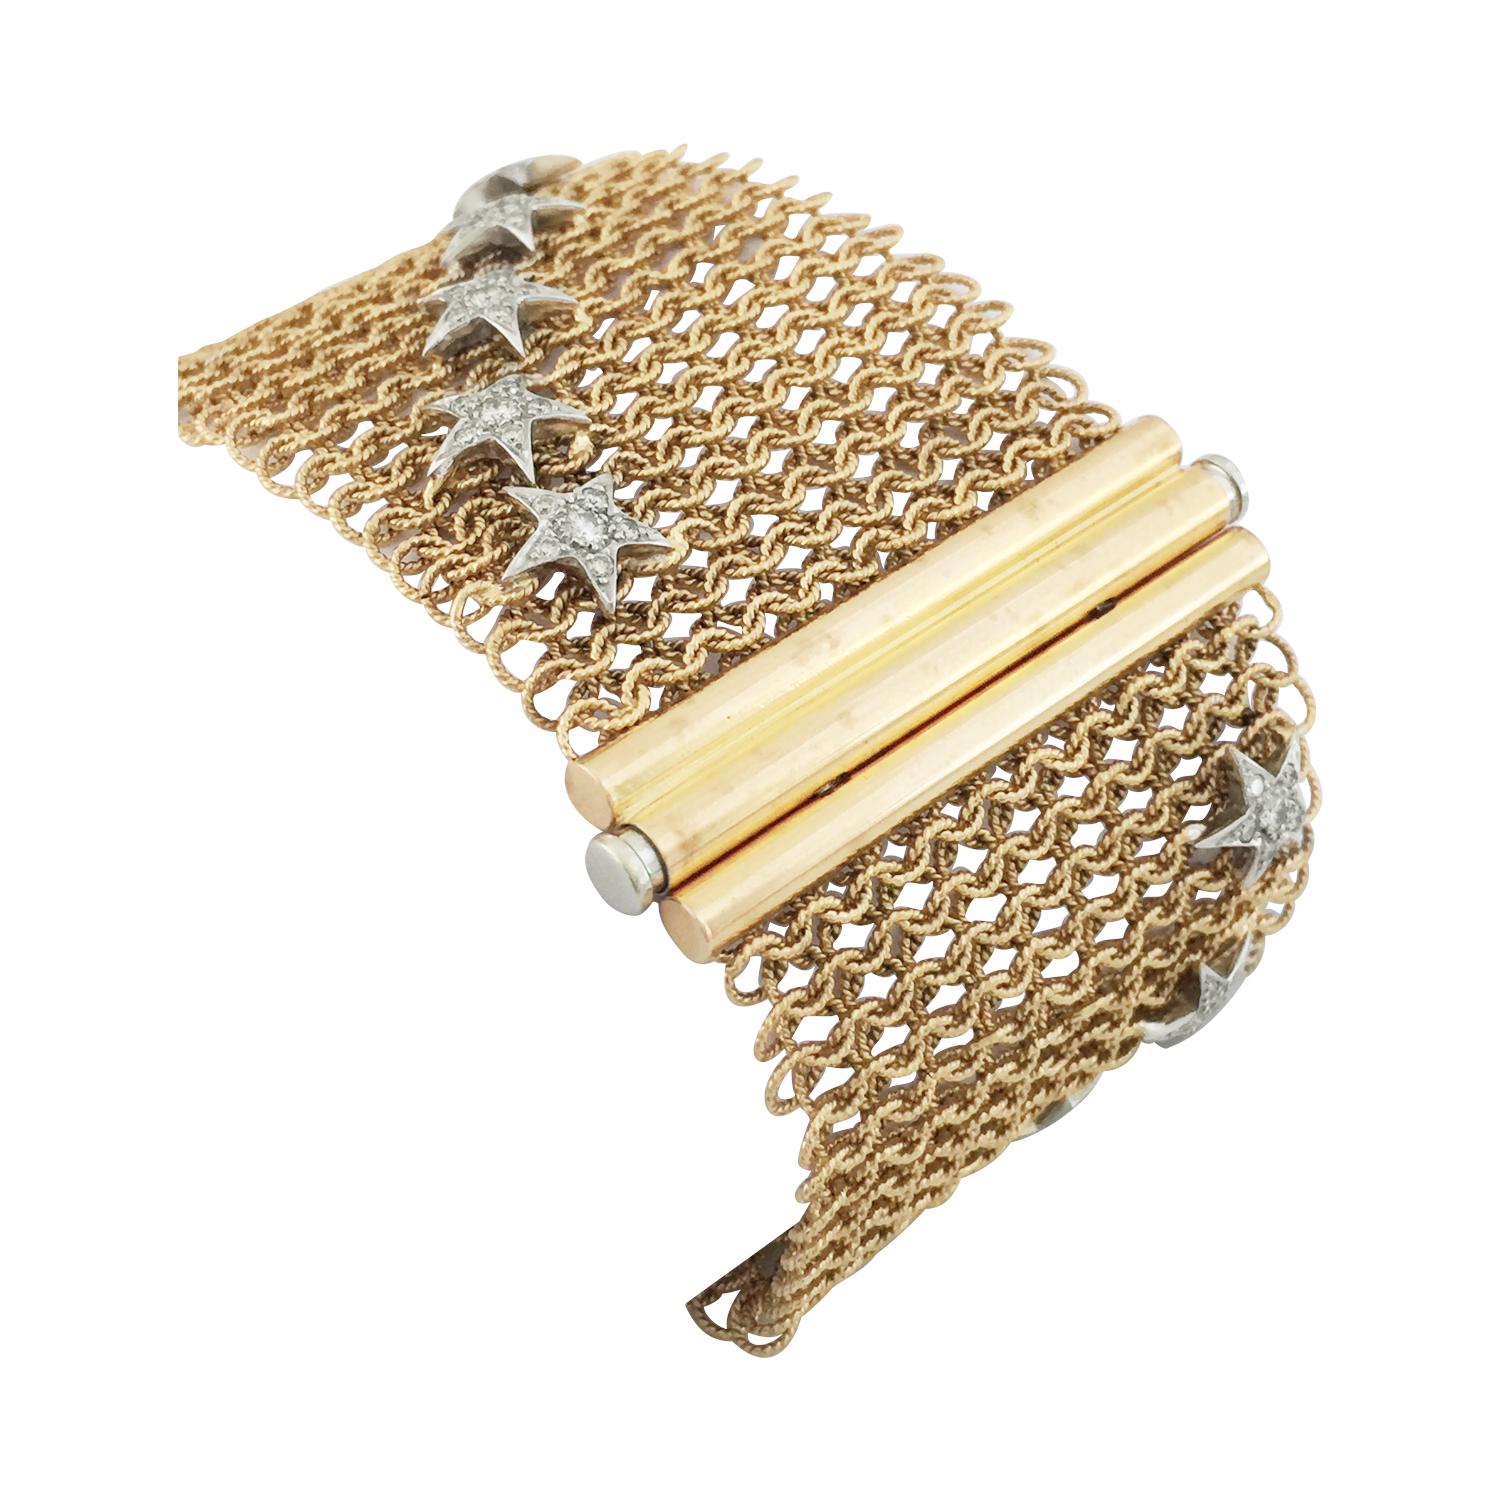 Contemporary Pink Gold Mesh Coat Bracelet, Decorated with 16 Stars Set with Brilliants